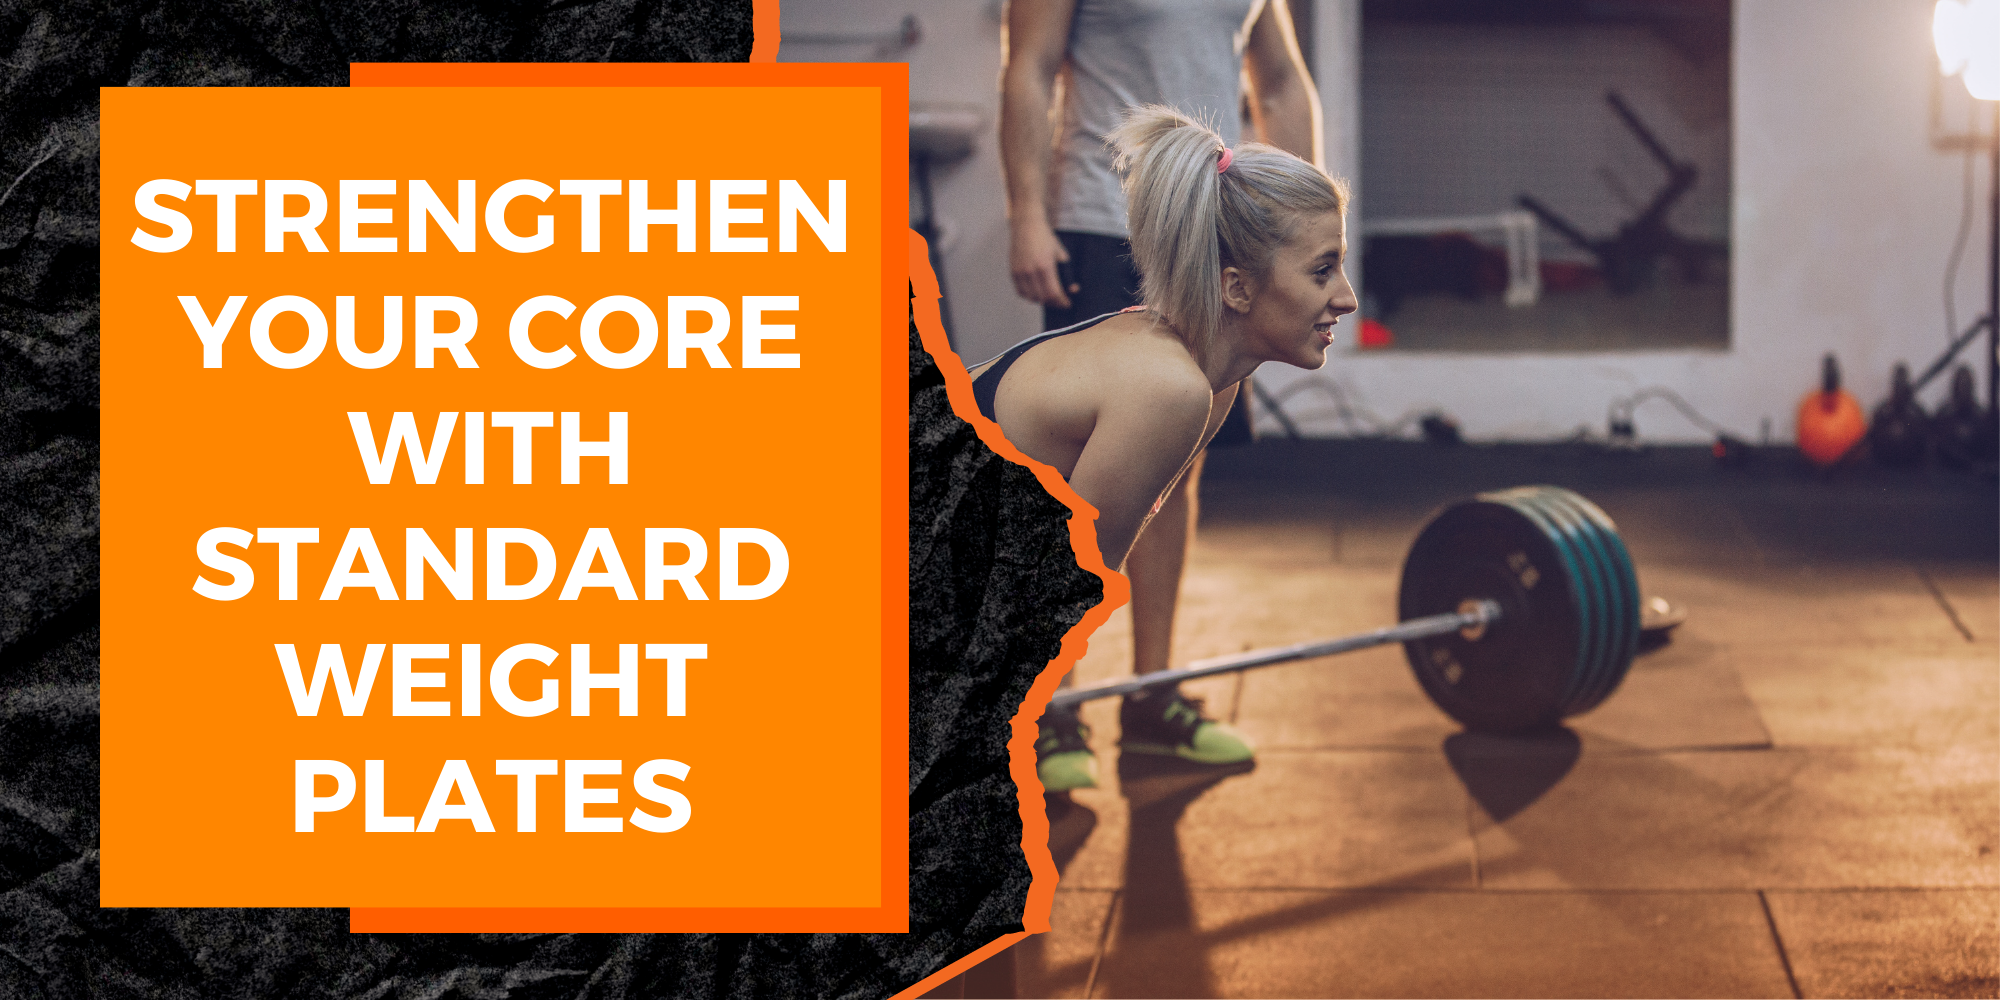 Strengthen Your Core with Standard Weight Plates